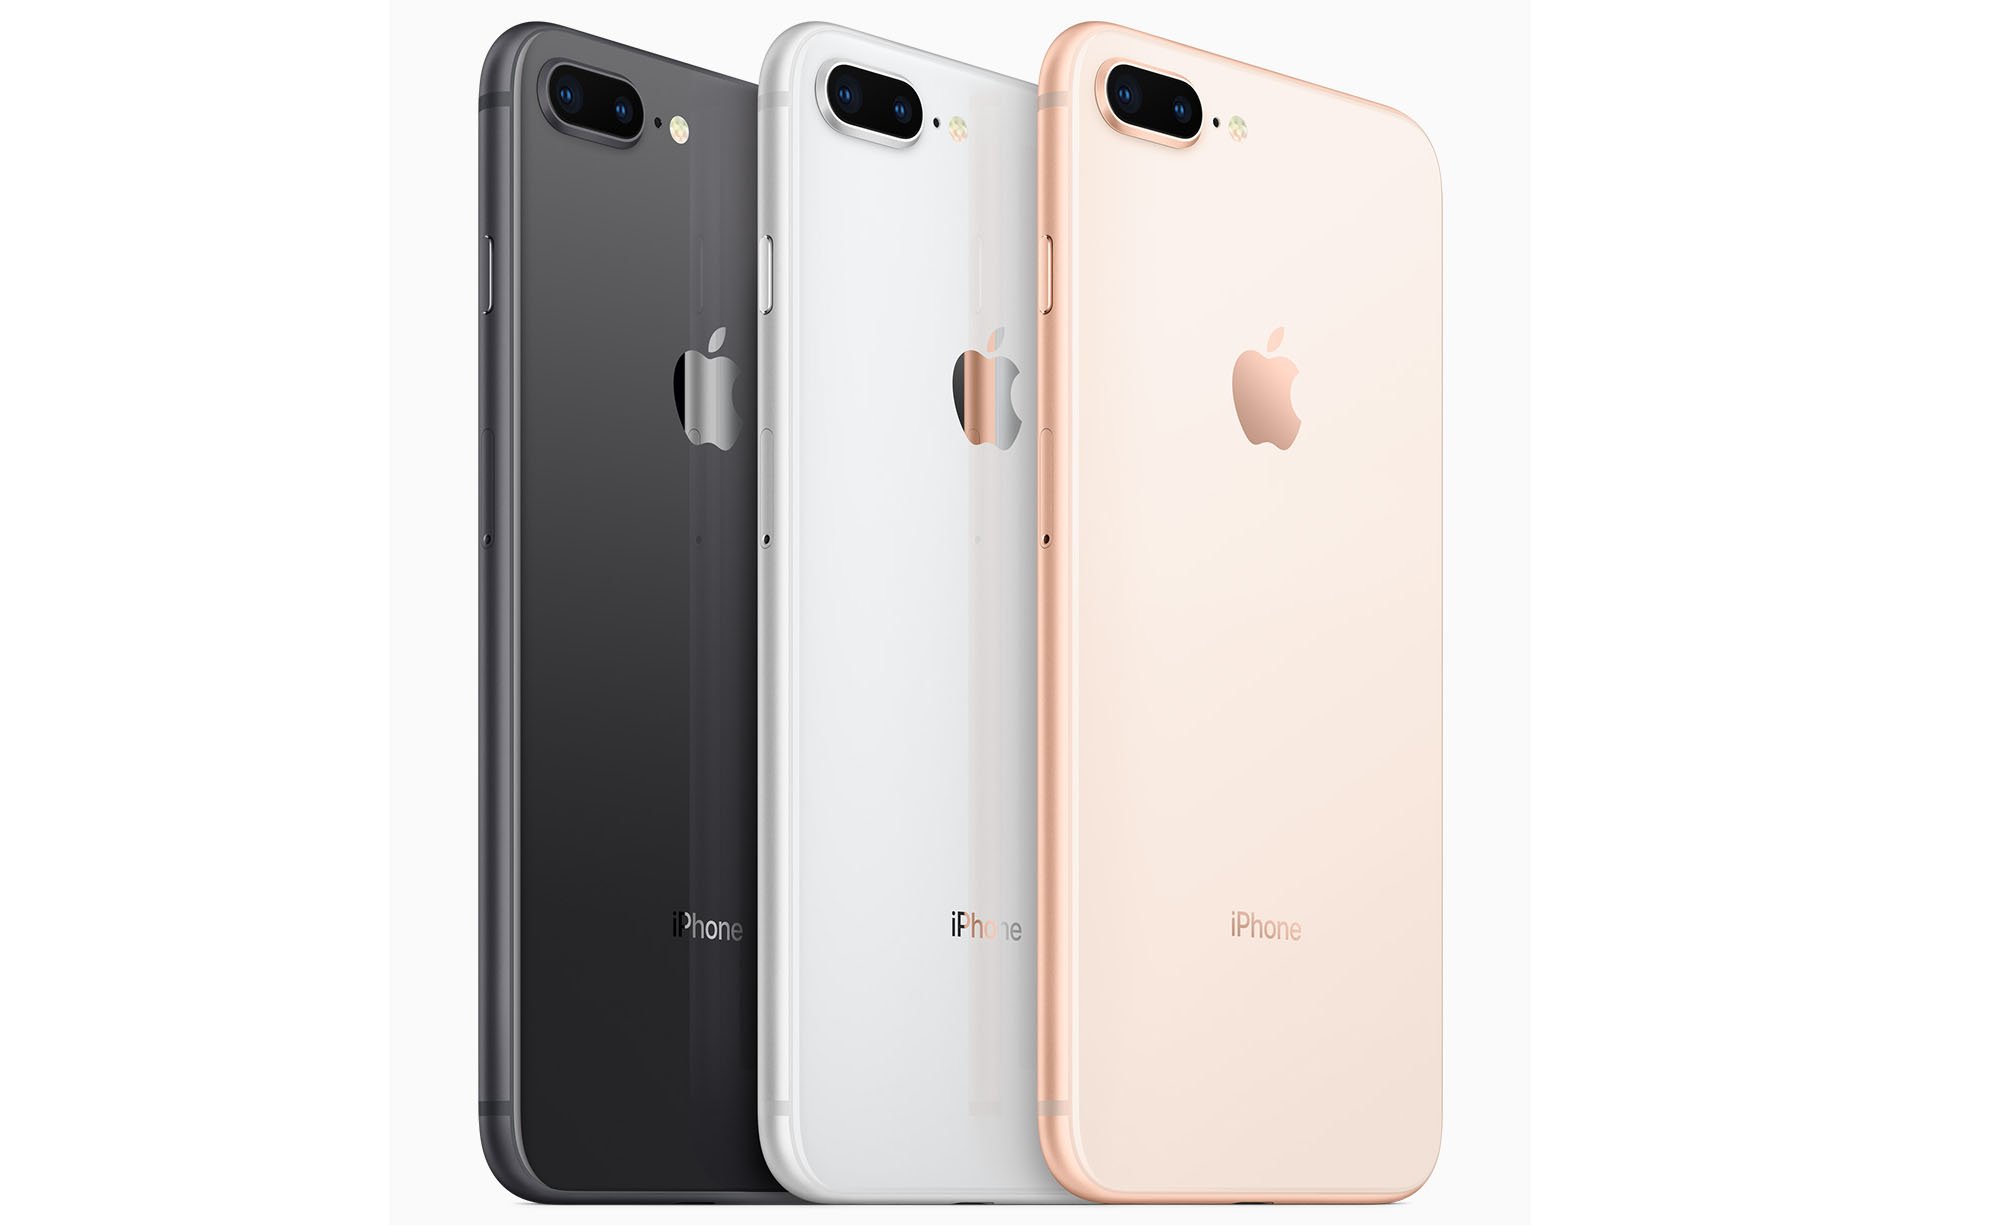 iPhone 8 & iPhone 8 Plus. Specification and date of release